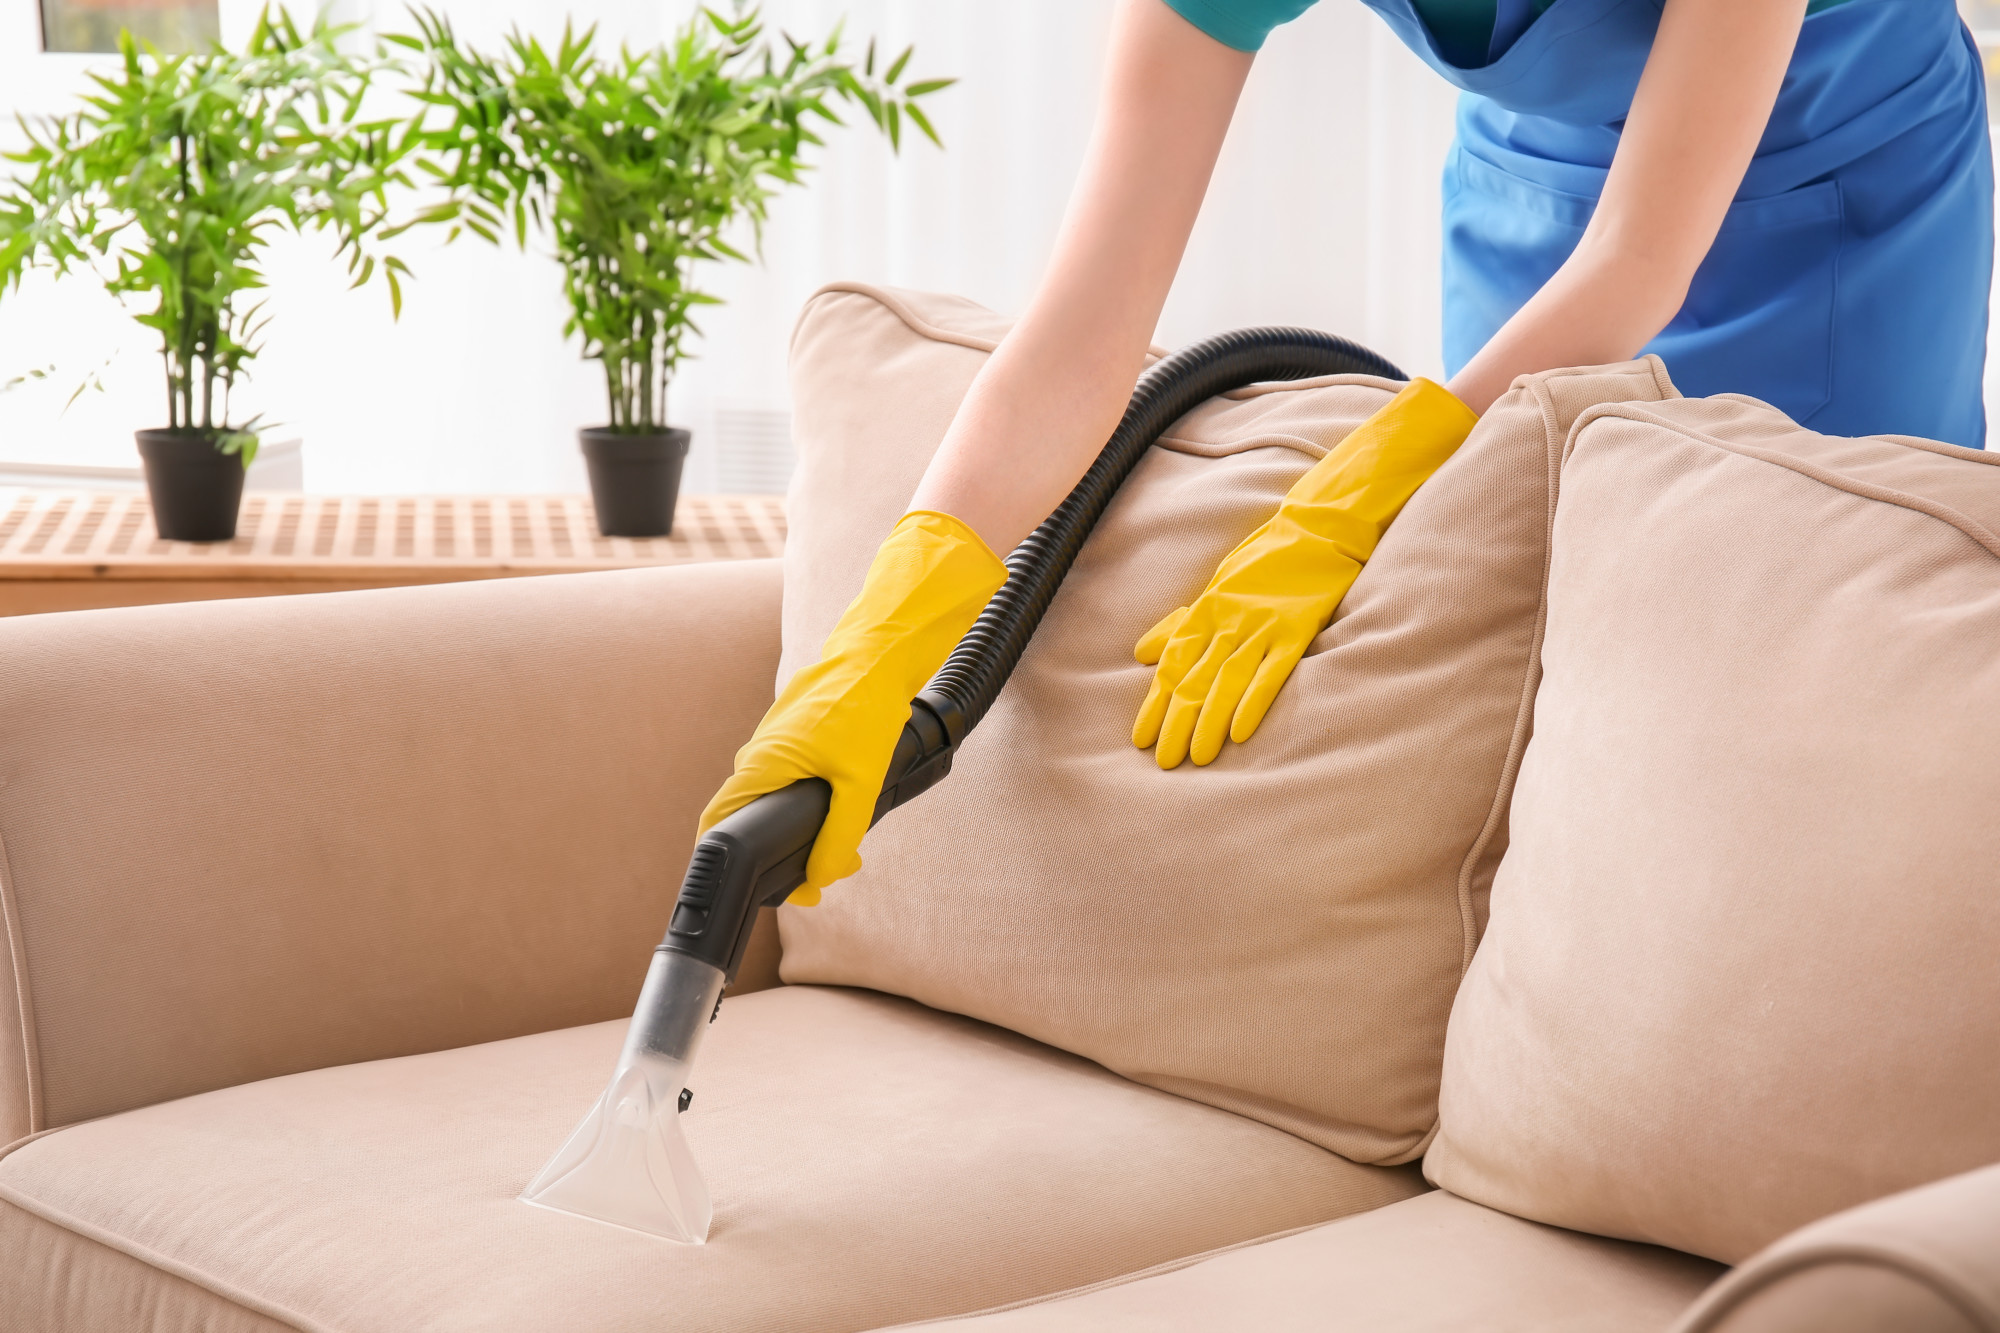 Achieve a clean fabric sofa using an upholstery steam cleaner